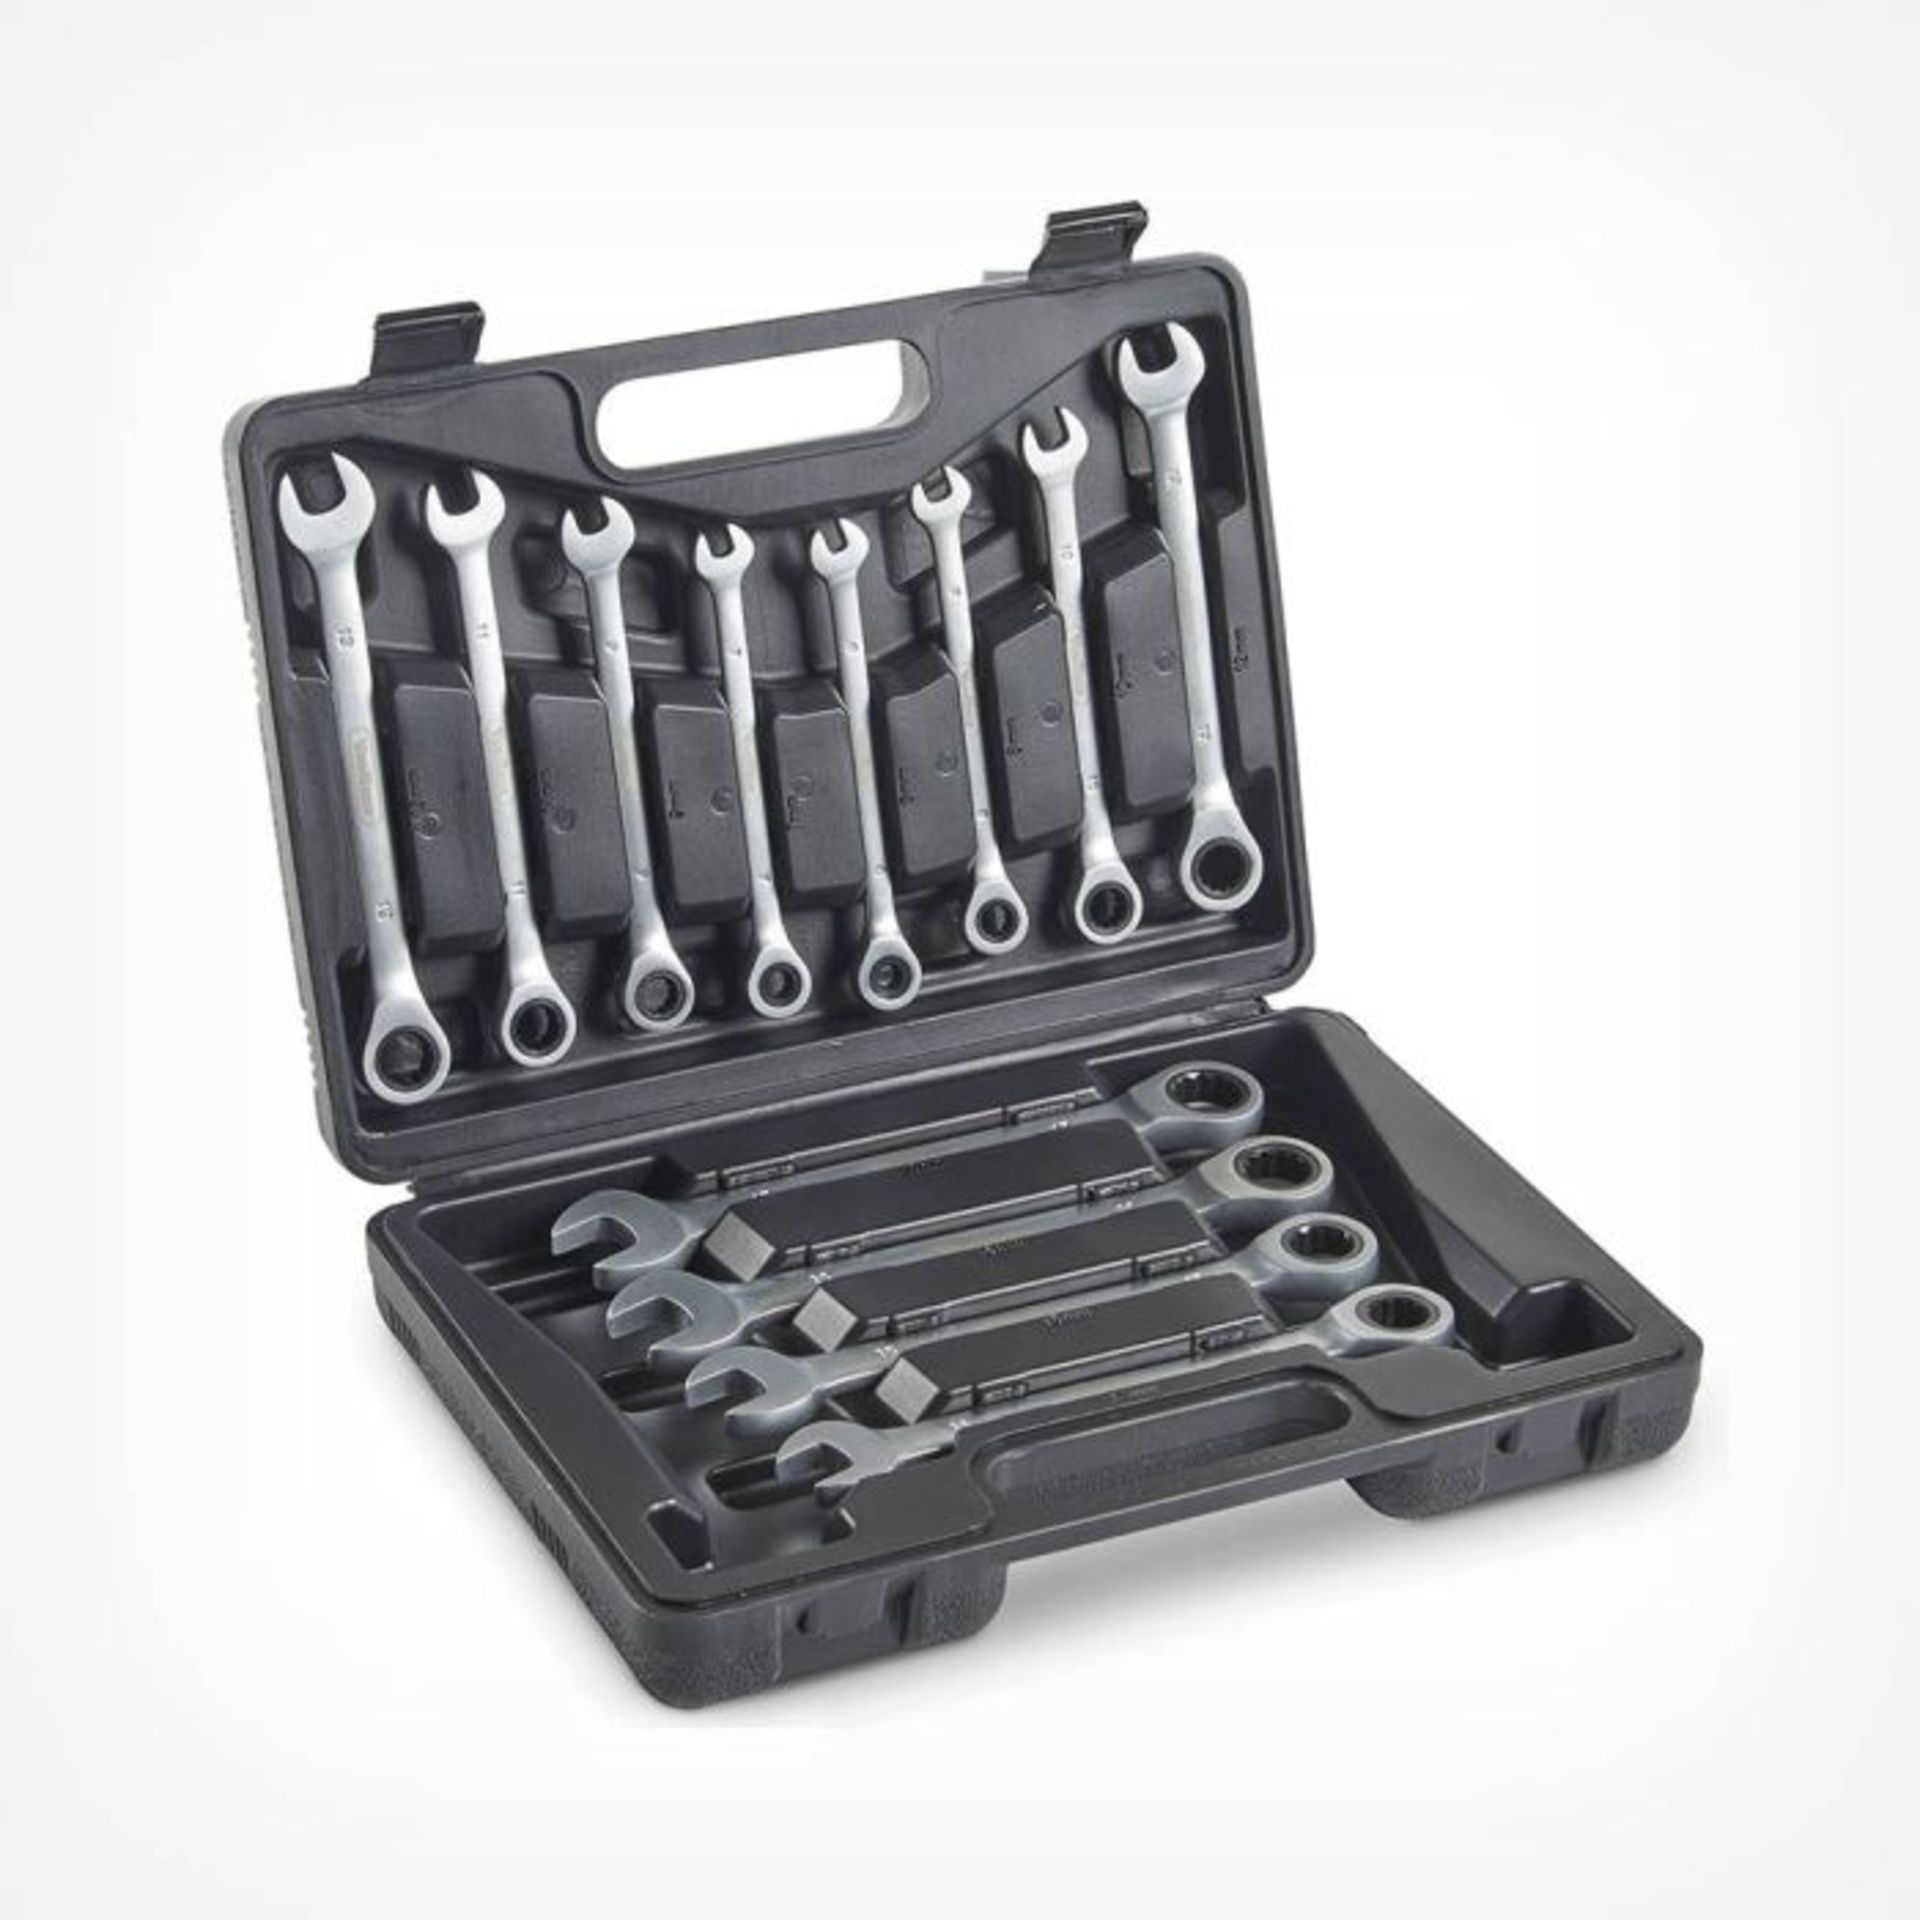 . 12pc Ratchet Spanner Set. -ER51. With this combination spanner set, you have everything you need